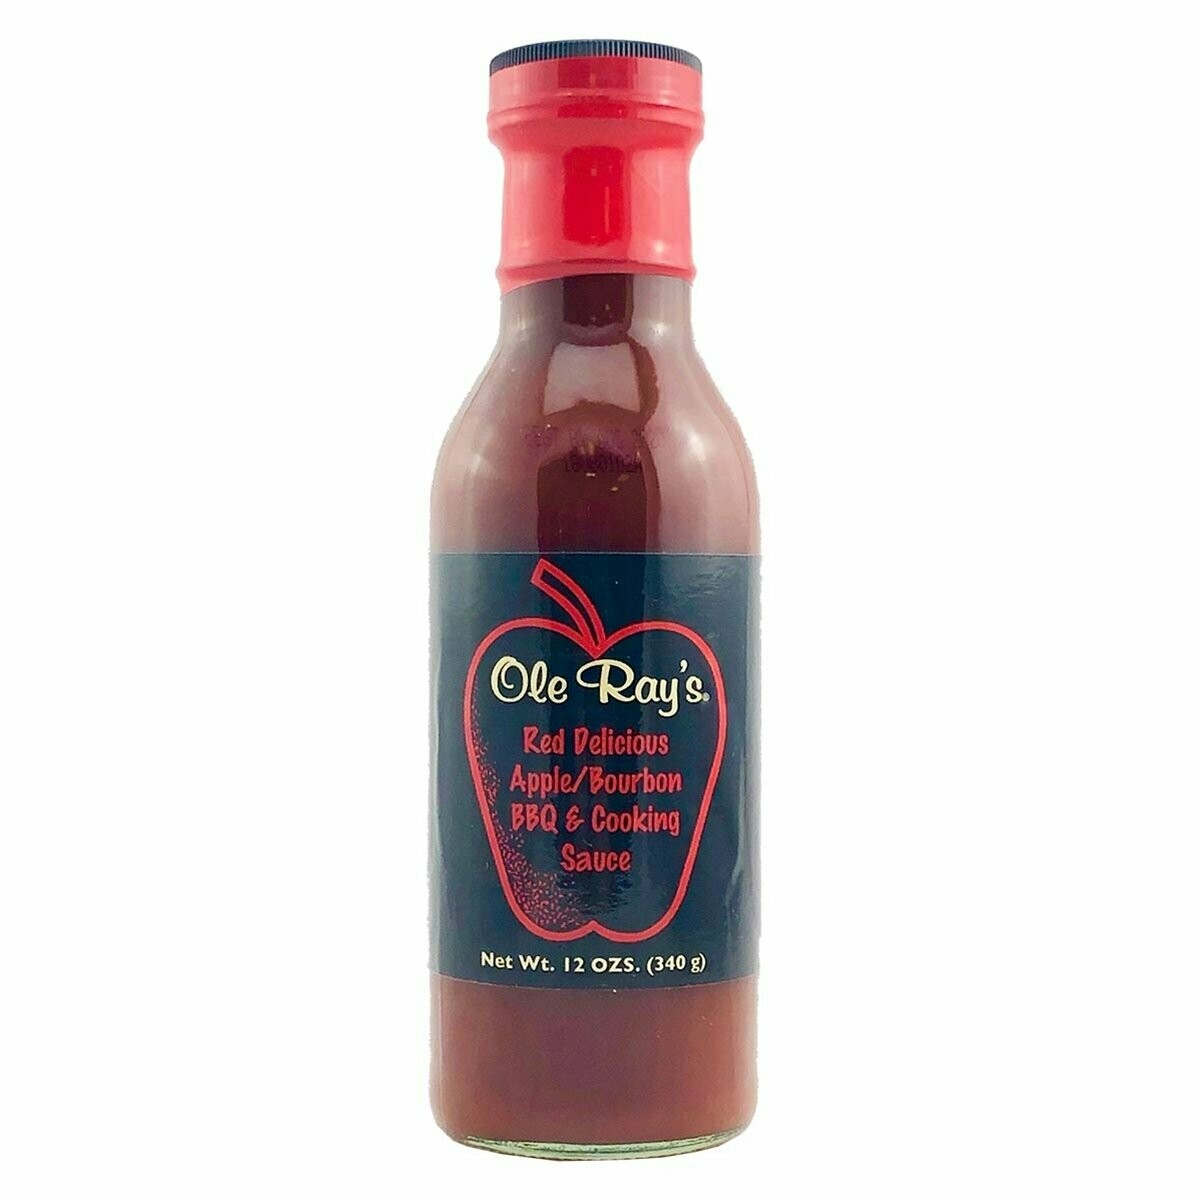 Ole Ray's Red Delicious Apple Bourbon Barbecue and Cooking Sauce - 12 oz